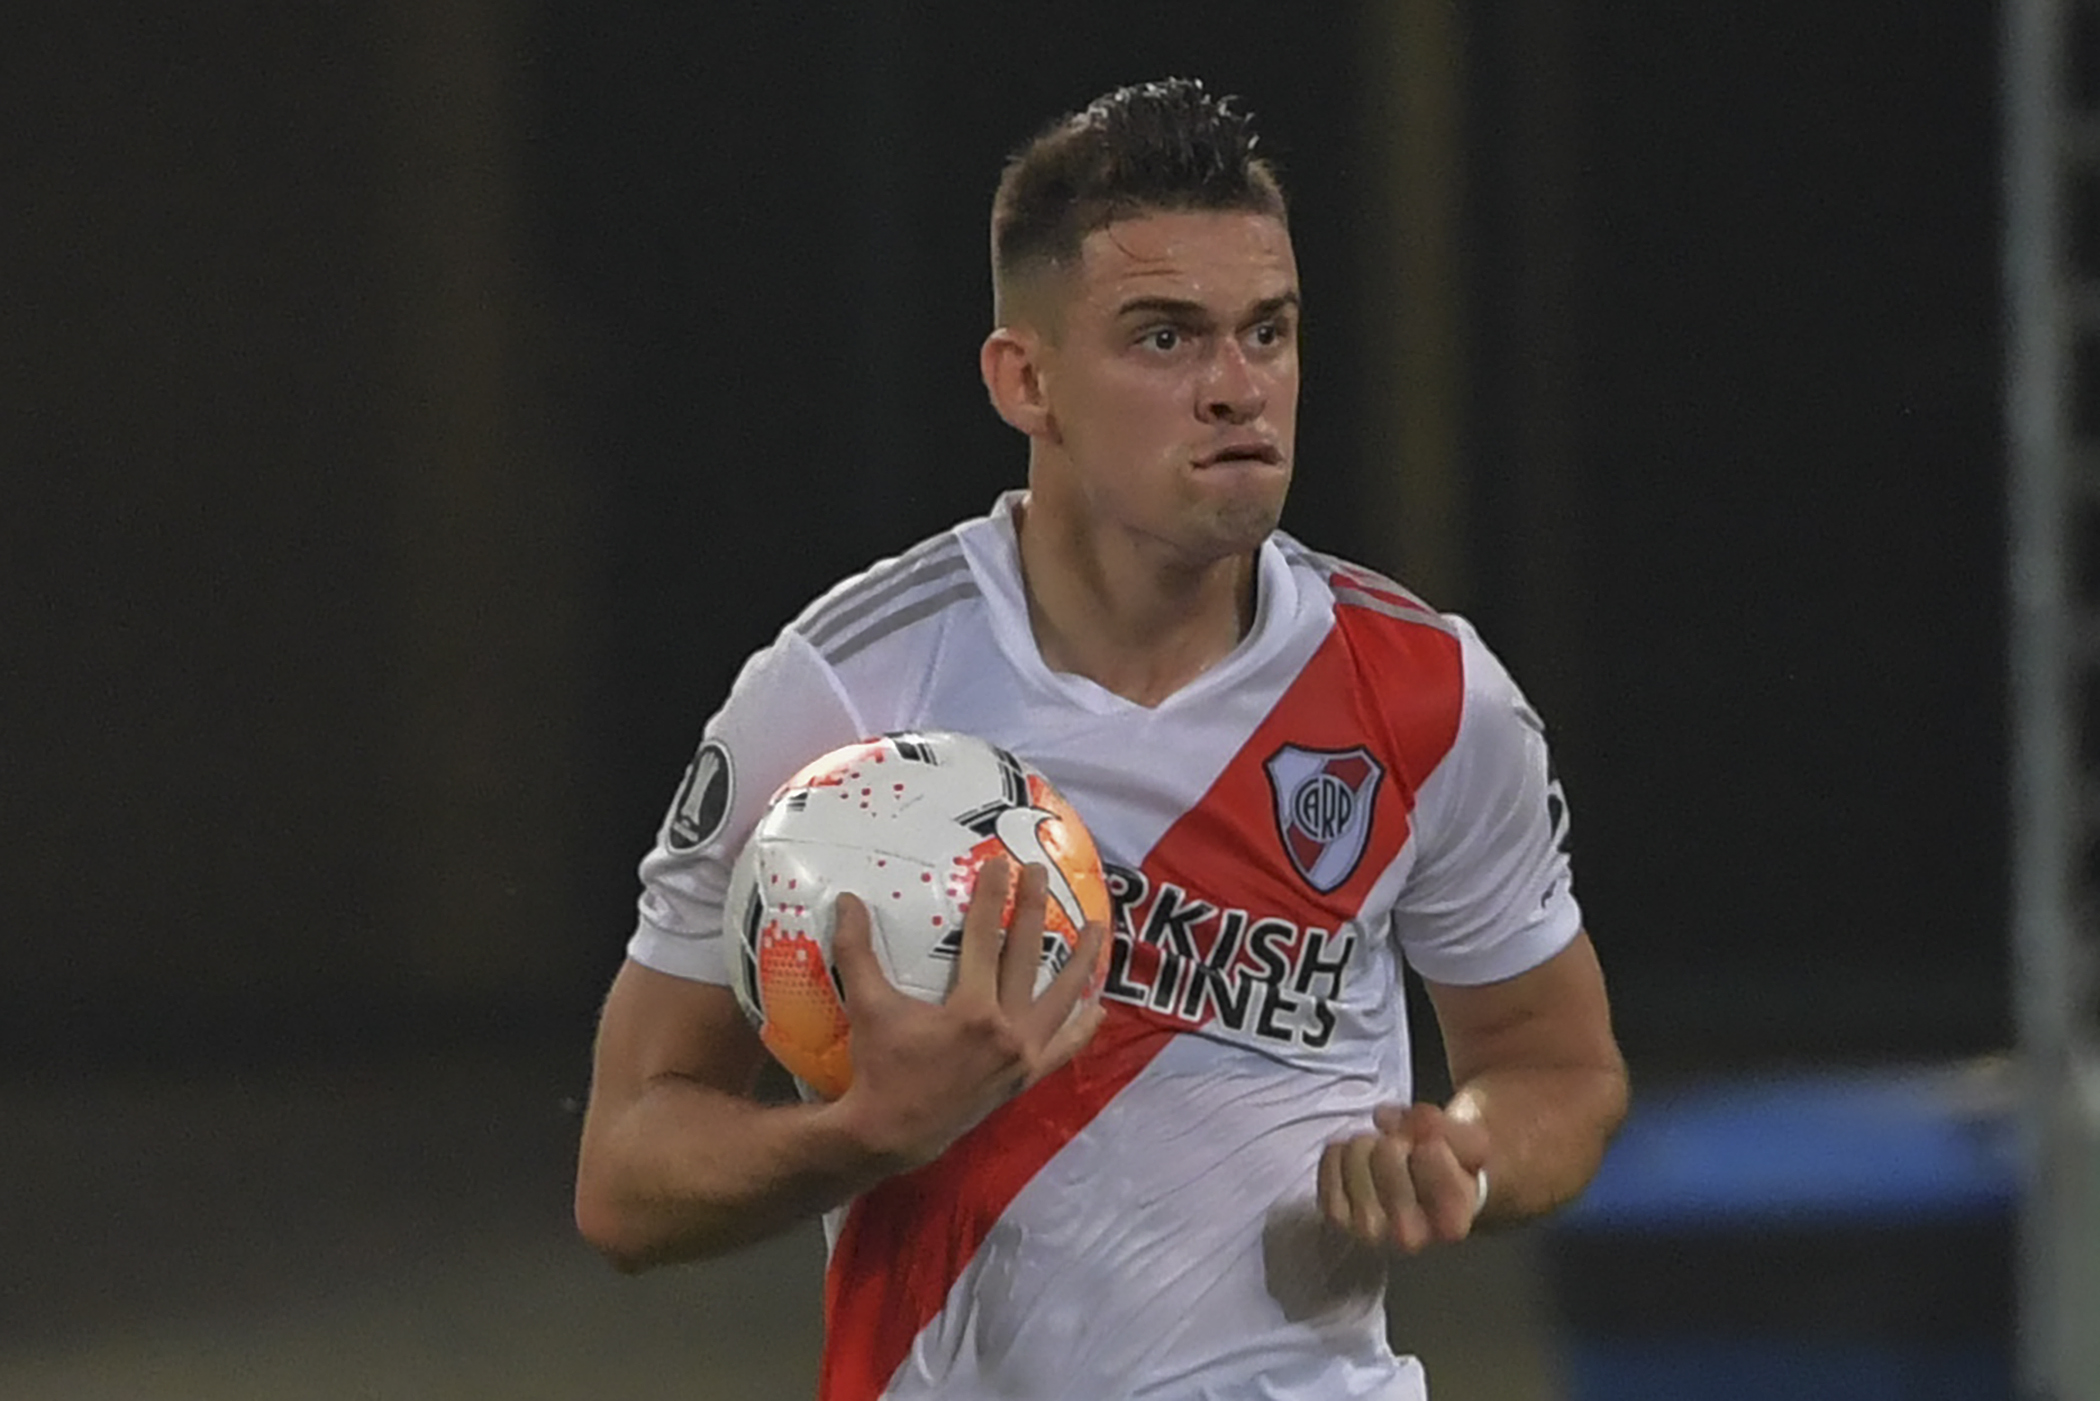 ‘He’s a player he always liked and would love to have on the team’ –  São Paulo FC physical trainer confirms the clubs’ interest in River Plate starlet